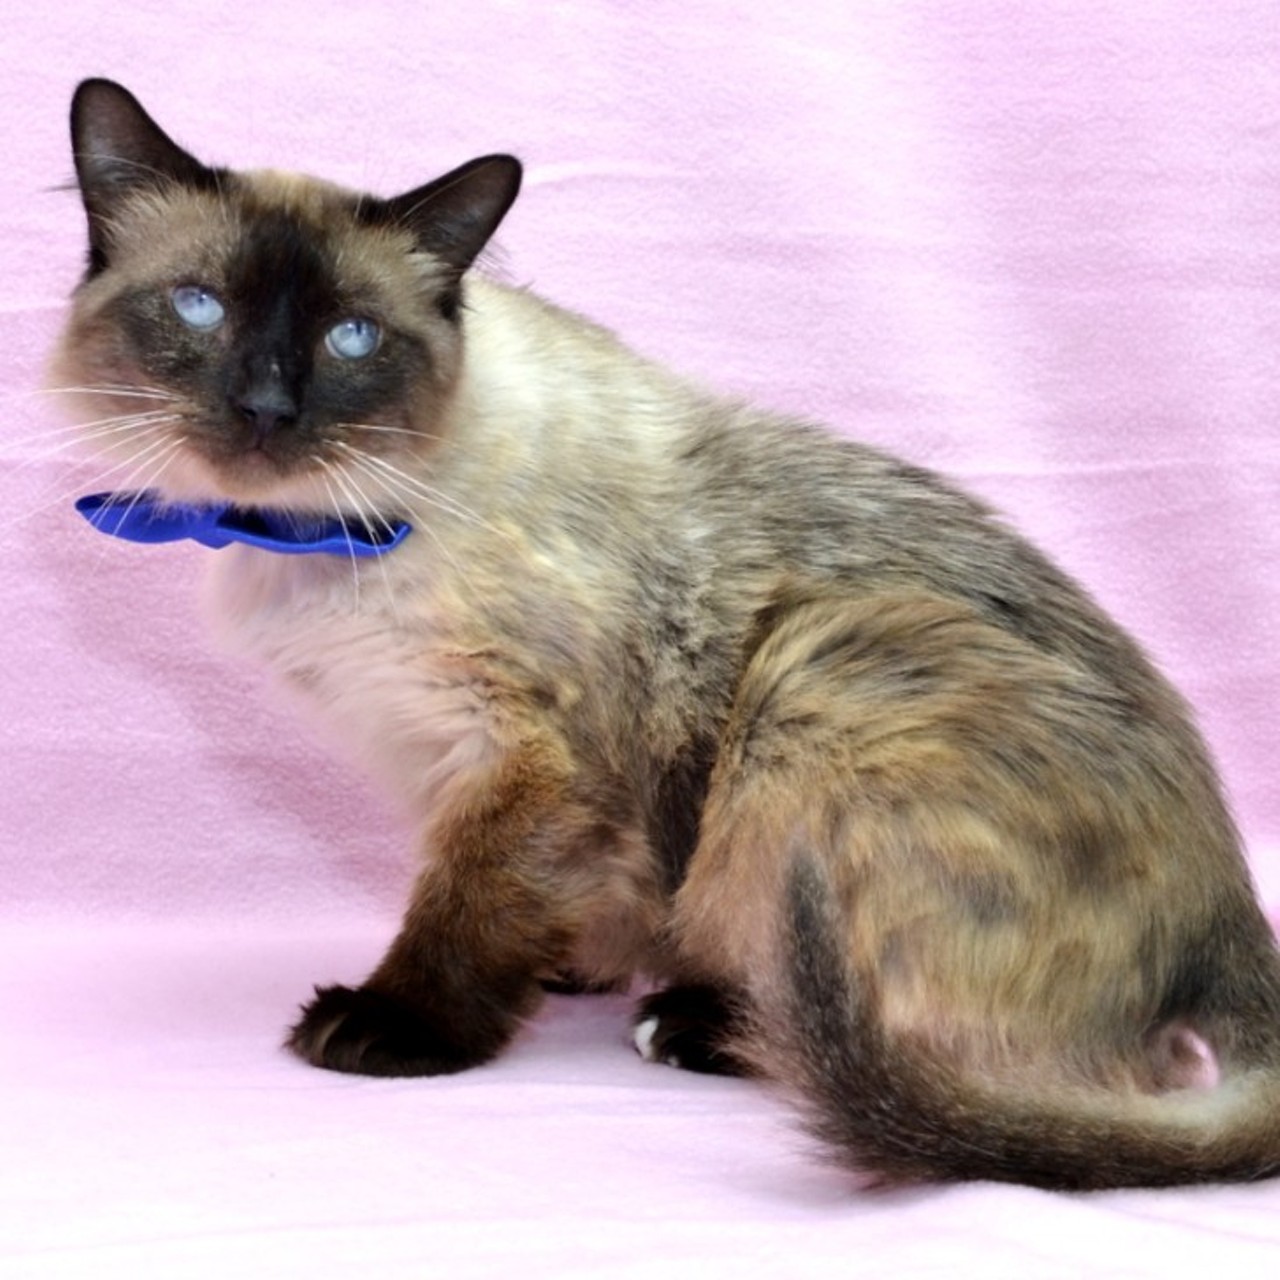 NAME: Skeeter
GENDER: Male
BREED: Siamese
AGE: 8 years
WEIGHT: 12 pounds
SPECIAL CONSIDERATIONS: None
REASON I CAME TO MHS: Agency transfer
LOCATION: Berman Center for Animal Care in Westland
ID NUMBER: 871938